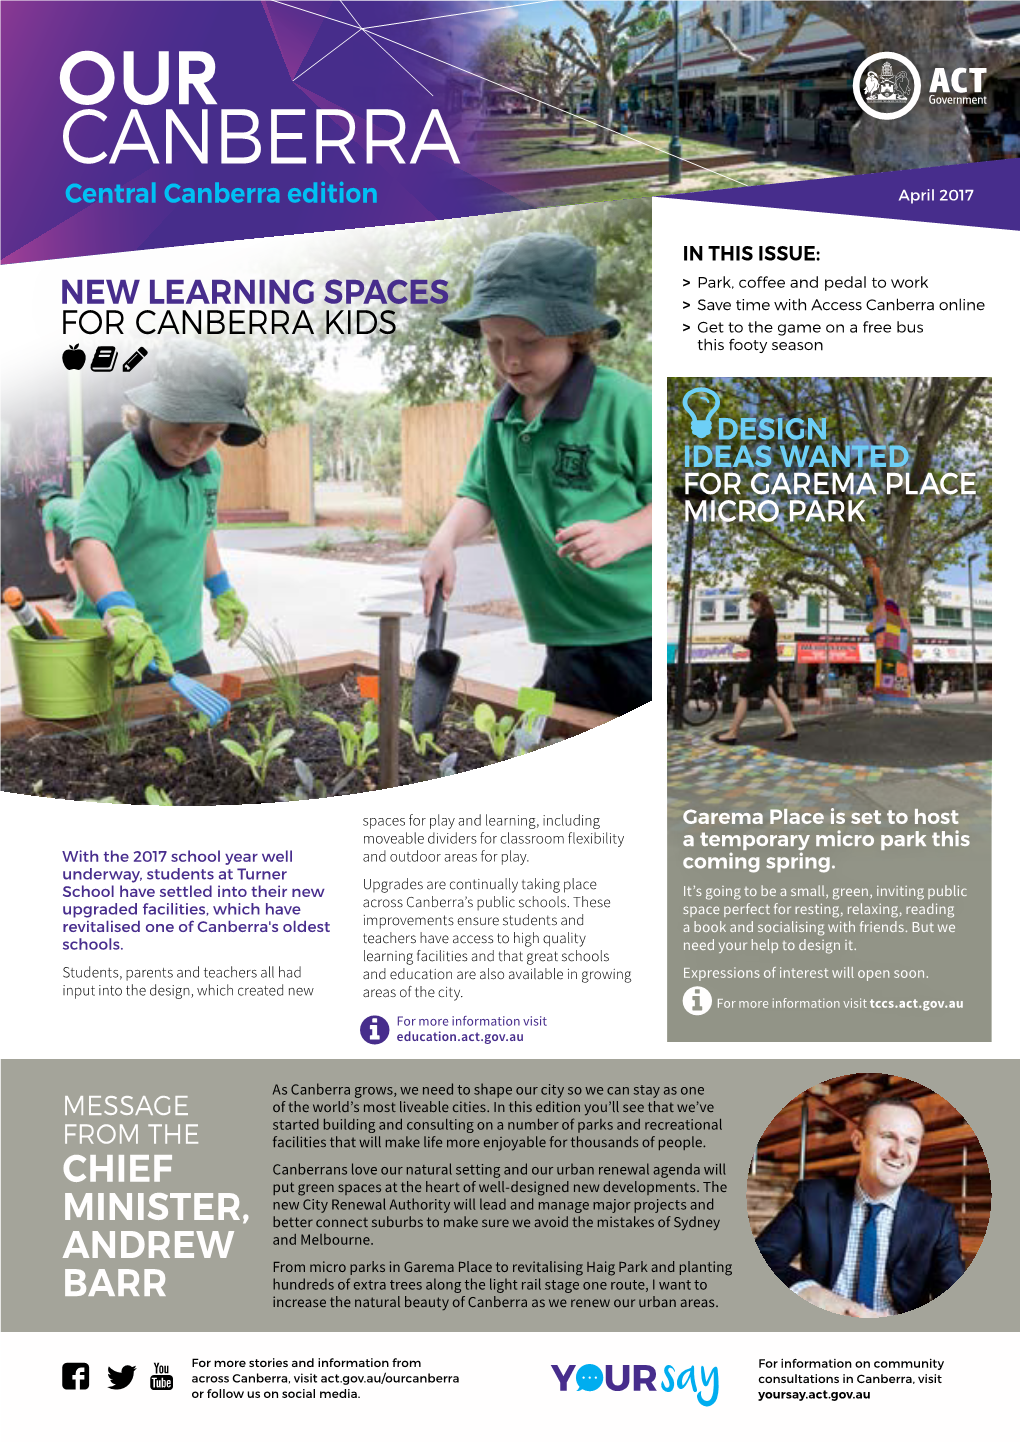 Our Canberra Newsletter